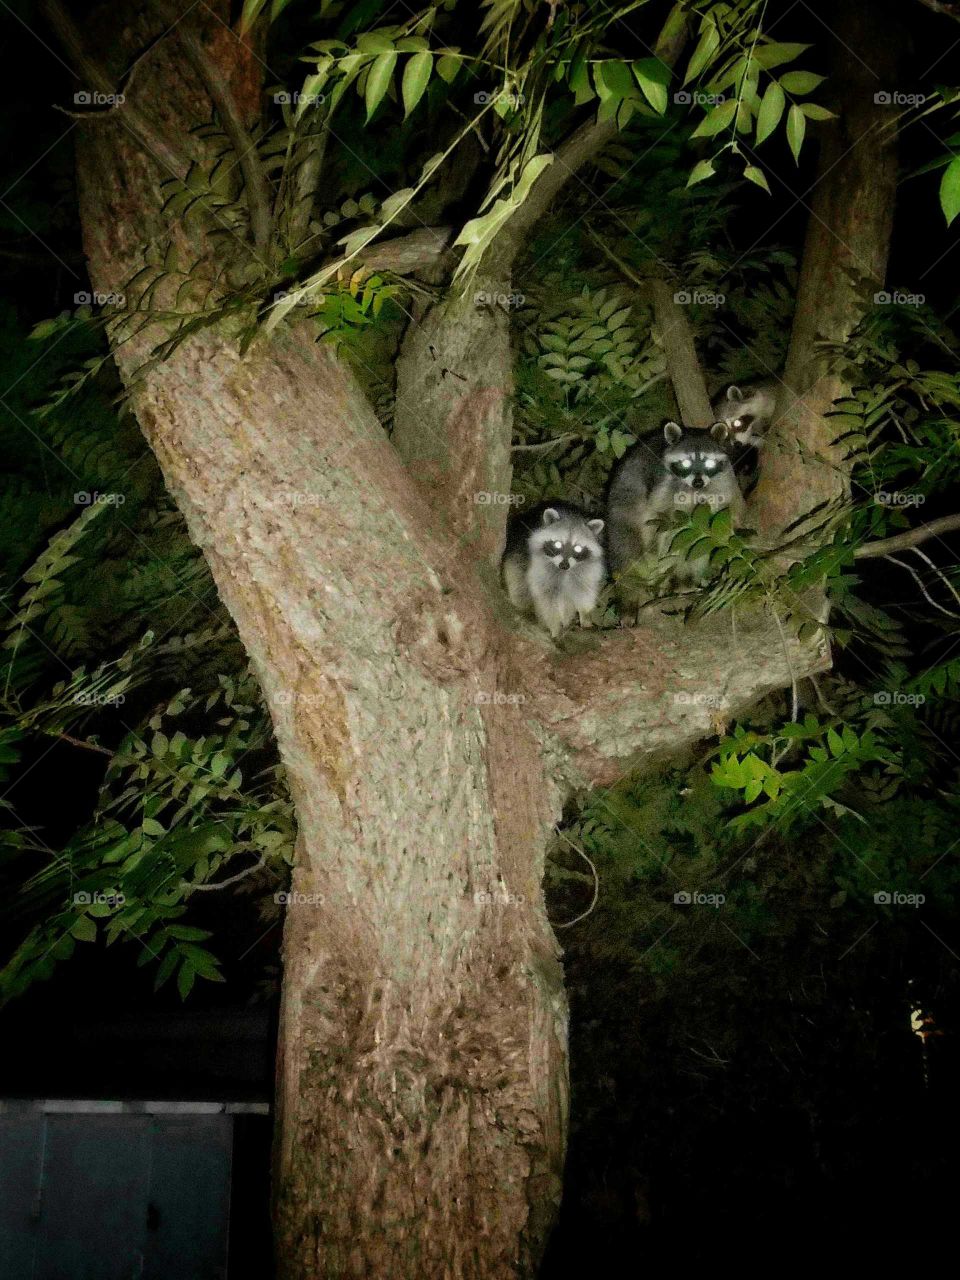 Mom's raccoon and babies in my tree